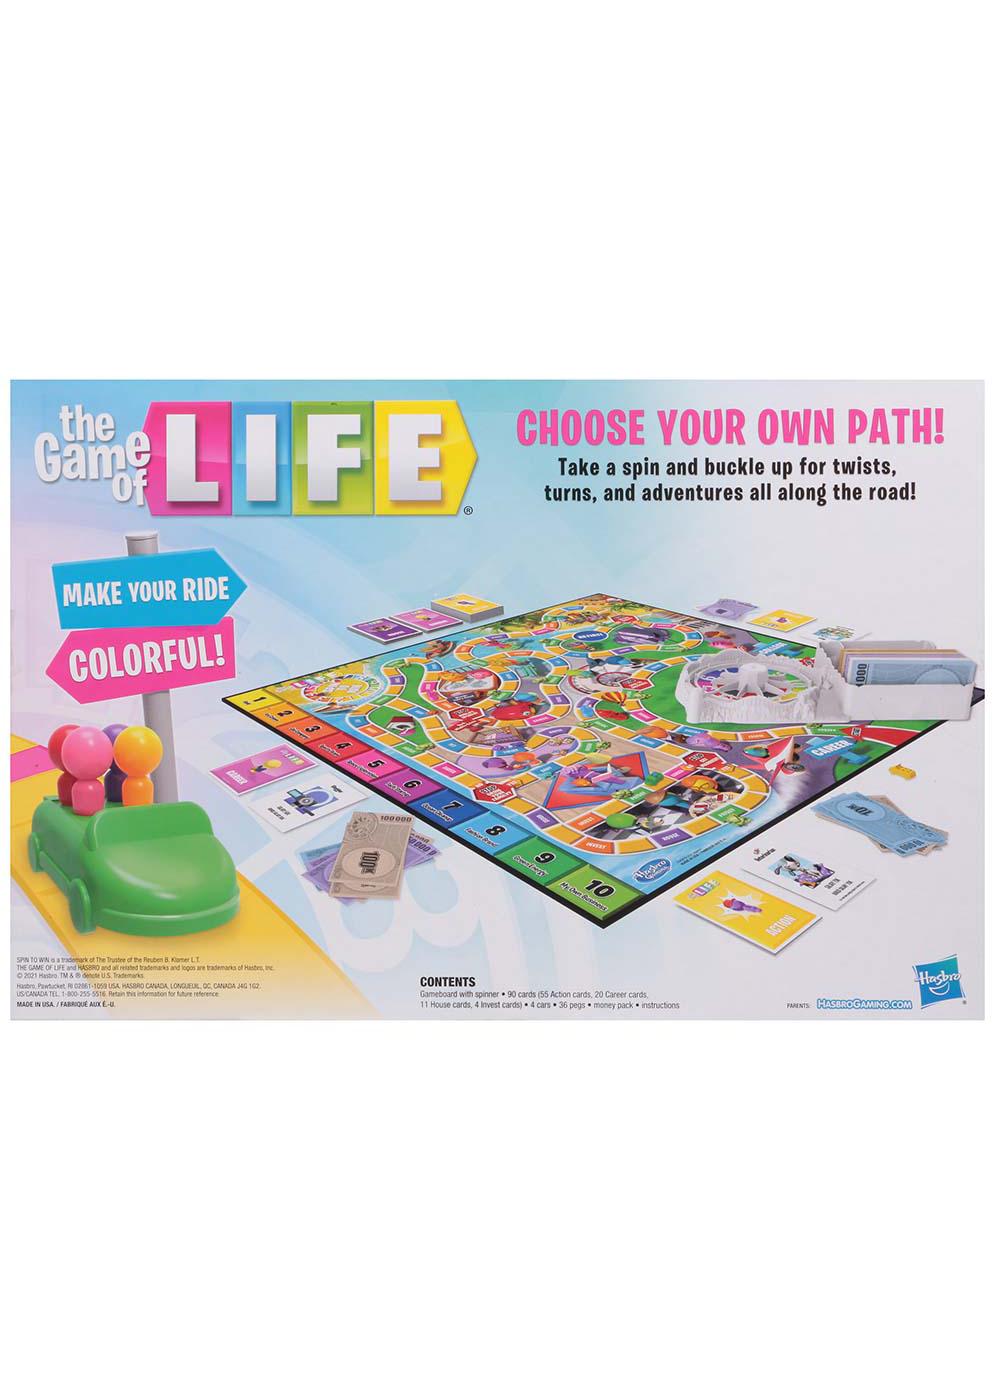 How to play The Game of Life, Official Rules